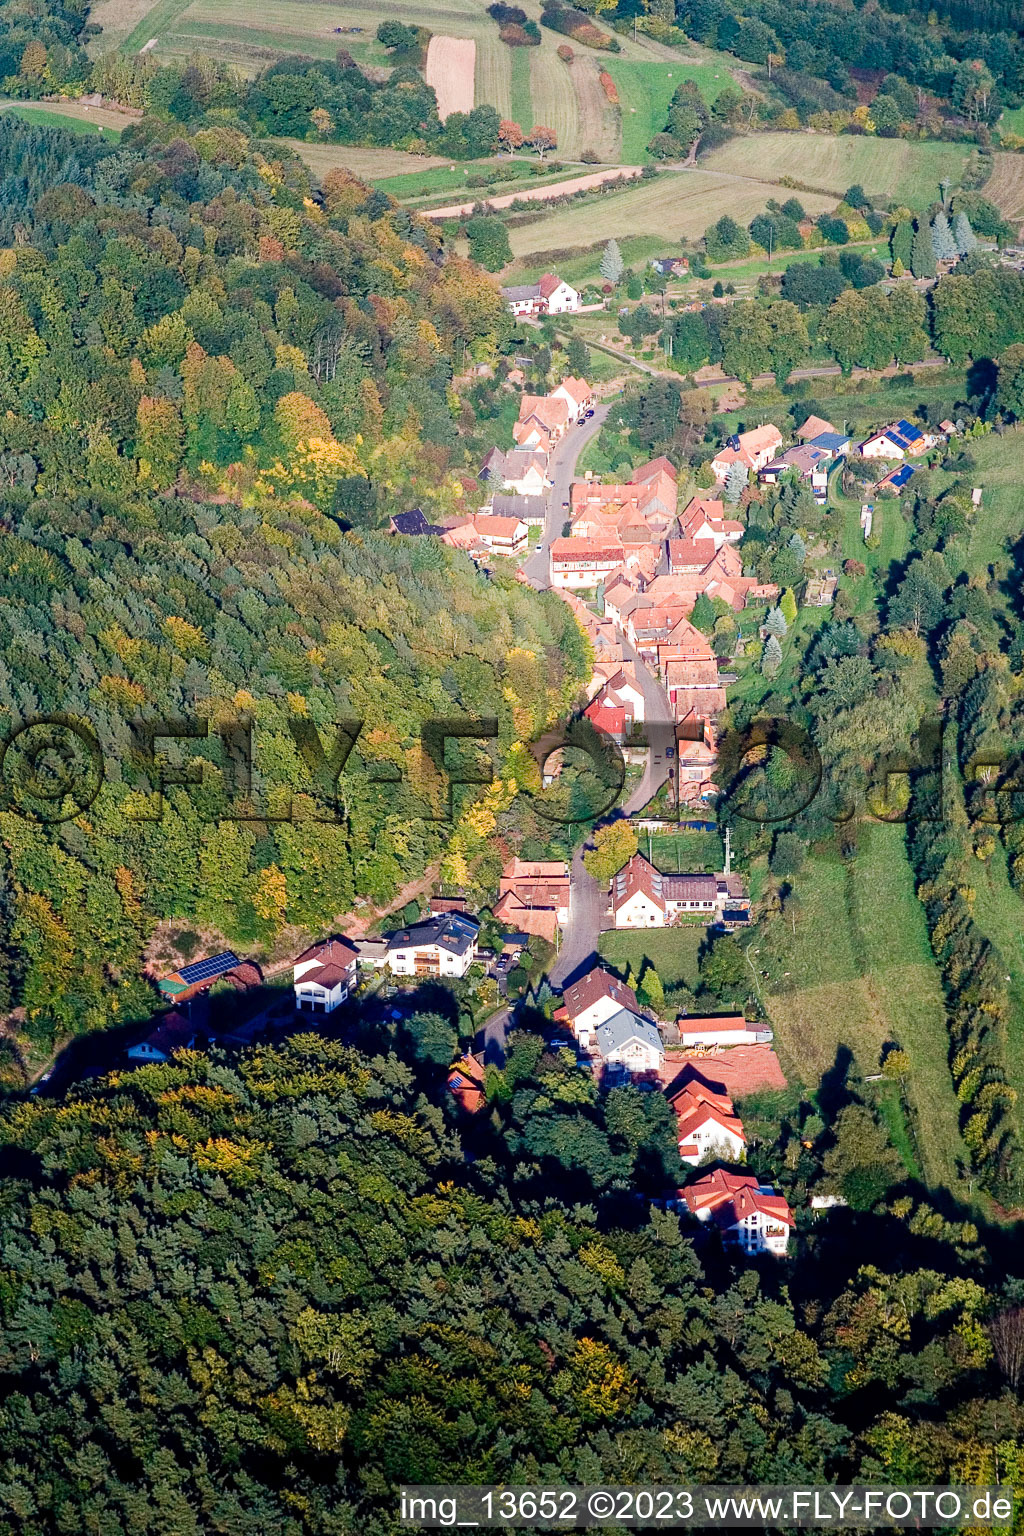 Oberschlettenbach in the state Rhineland-Palatinate, Germany seen from above